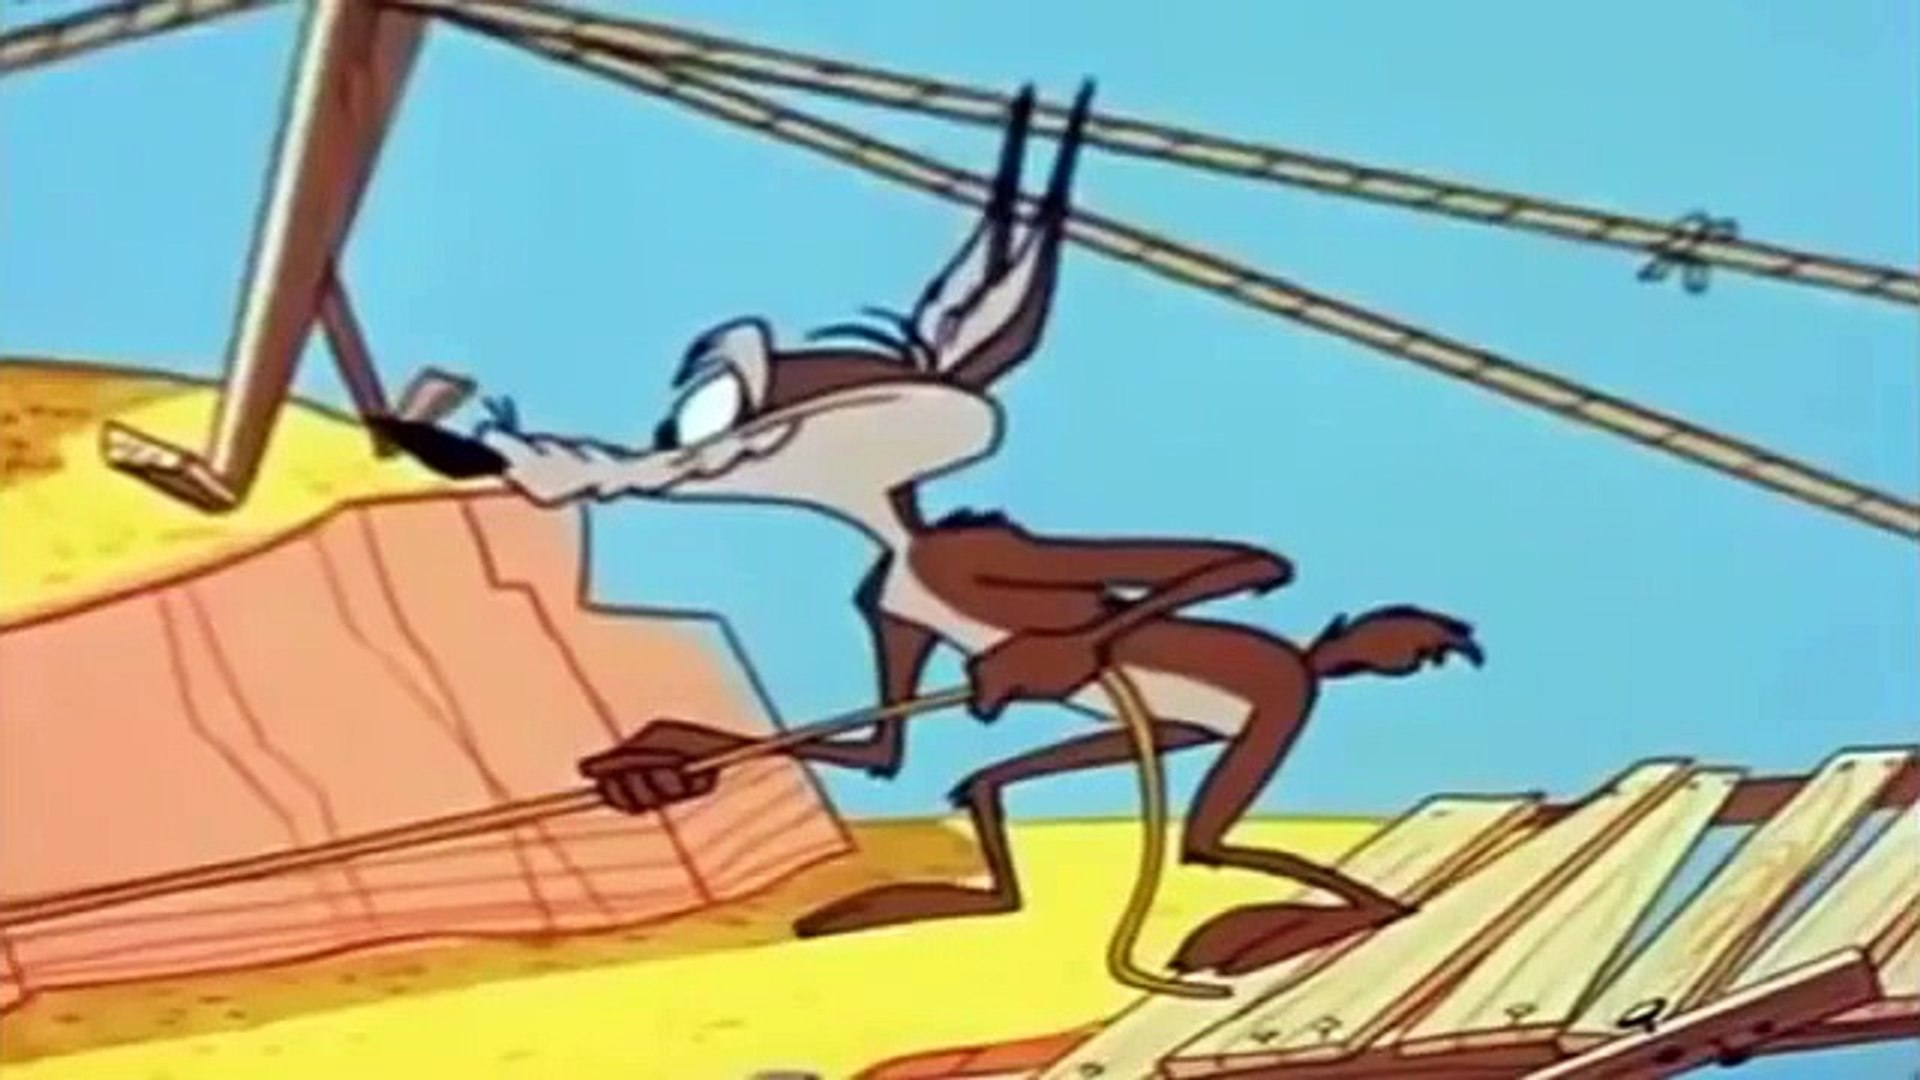 Roadrunner and Coyote Cartoons Full Es Compilation 2 3 4 5 part 1/2 - video  Dailymotion